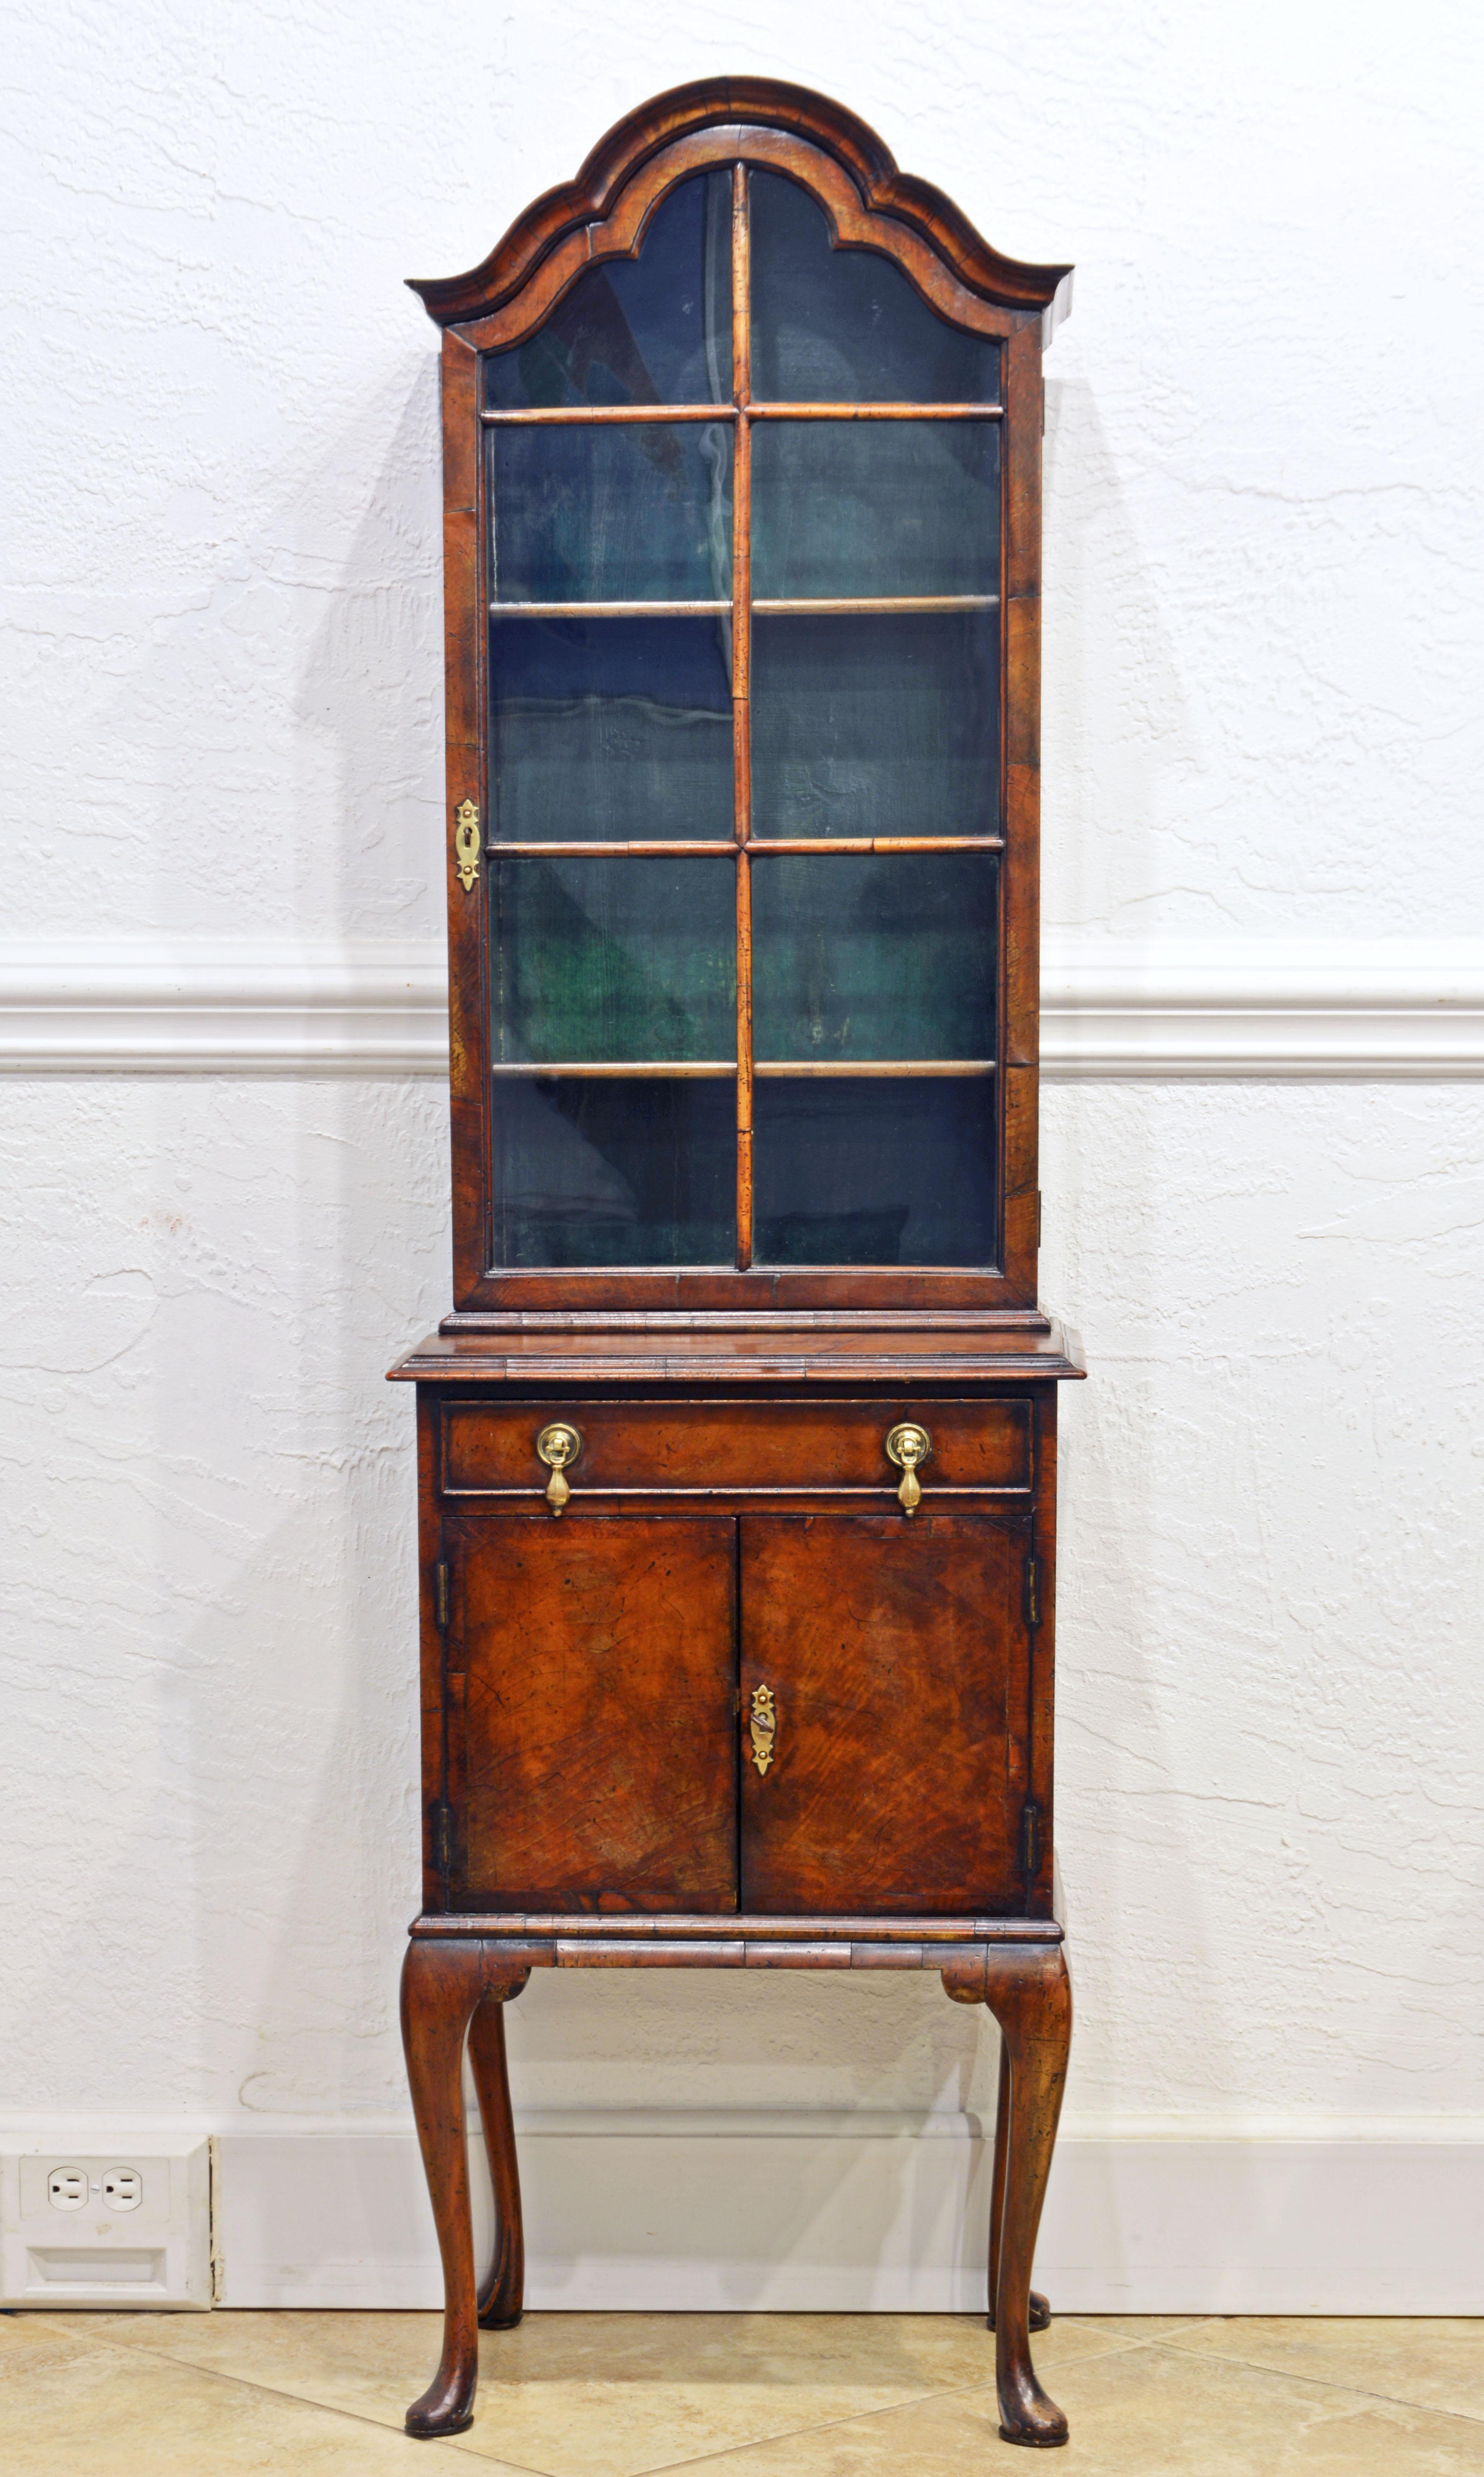 This adorable petite Queen Anne style burled walnut display or curio cabinet features a shaped domed top above two glazed doors with rounded mullions opening up to a painted and shelved interior. The lower part has a drawer above two doors opening